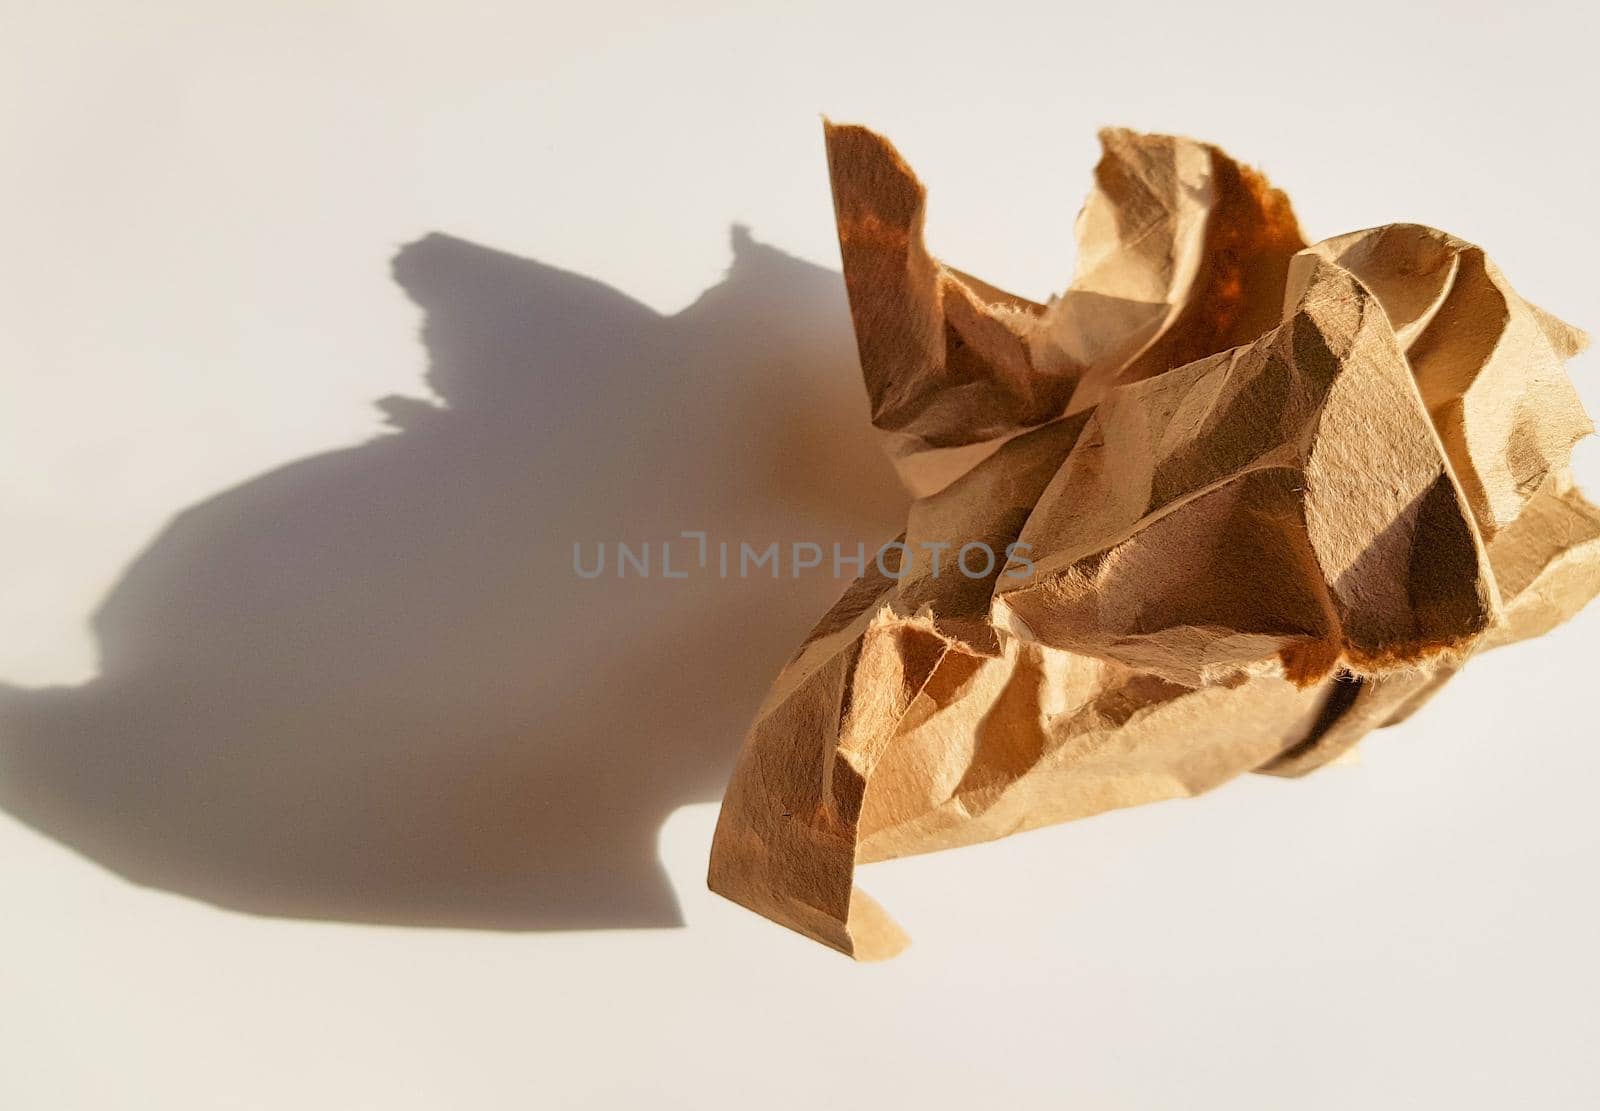 A crumpled paper ball made of brown kraft paper and its shadow on a light background, top view.